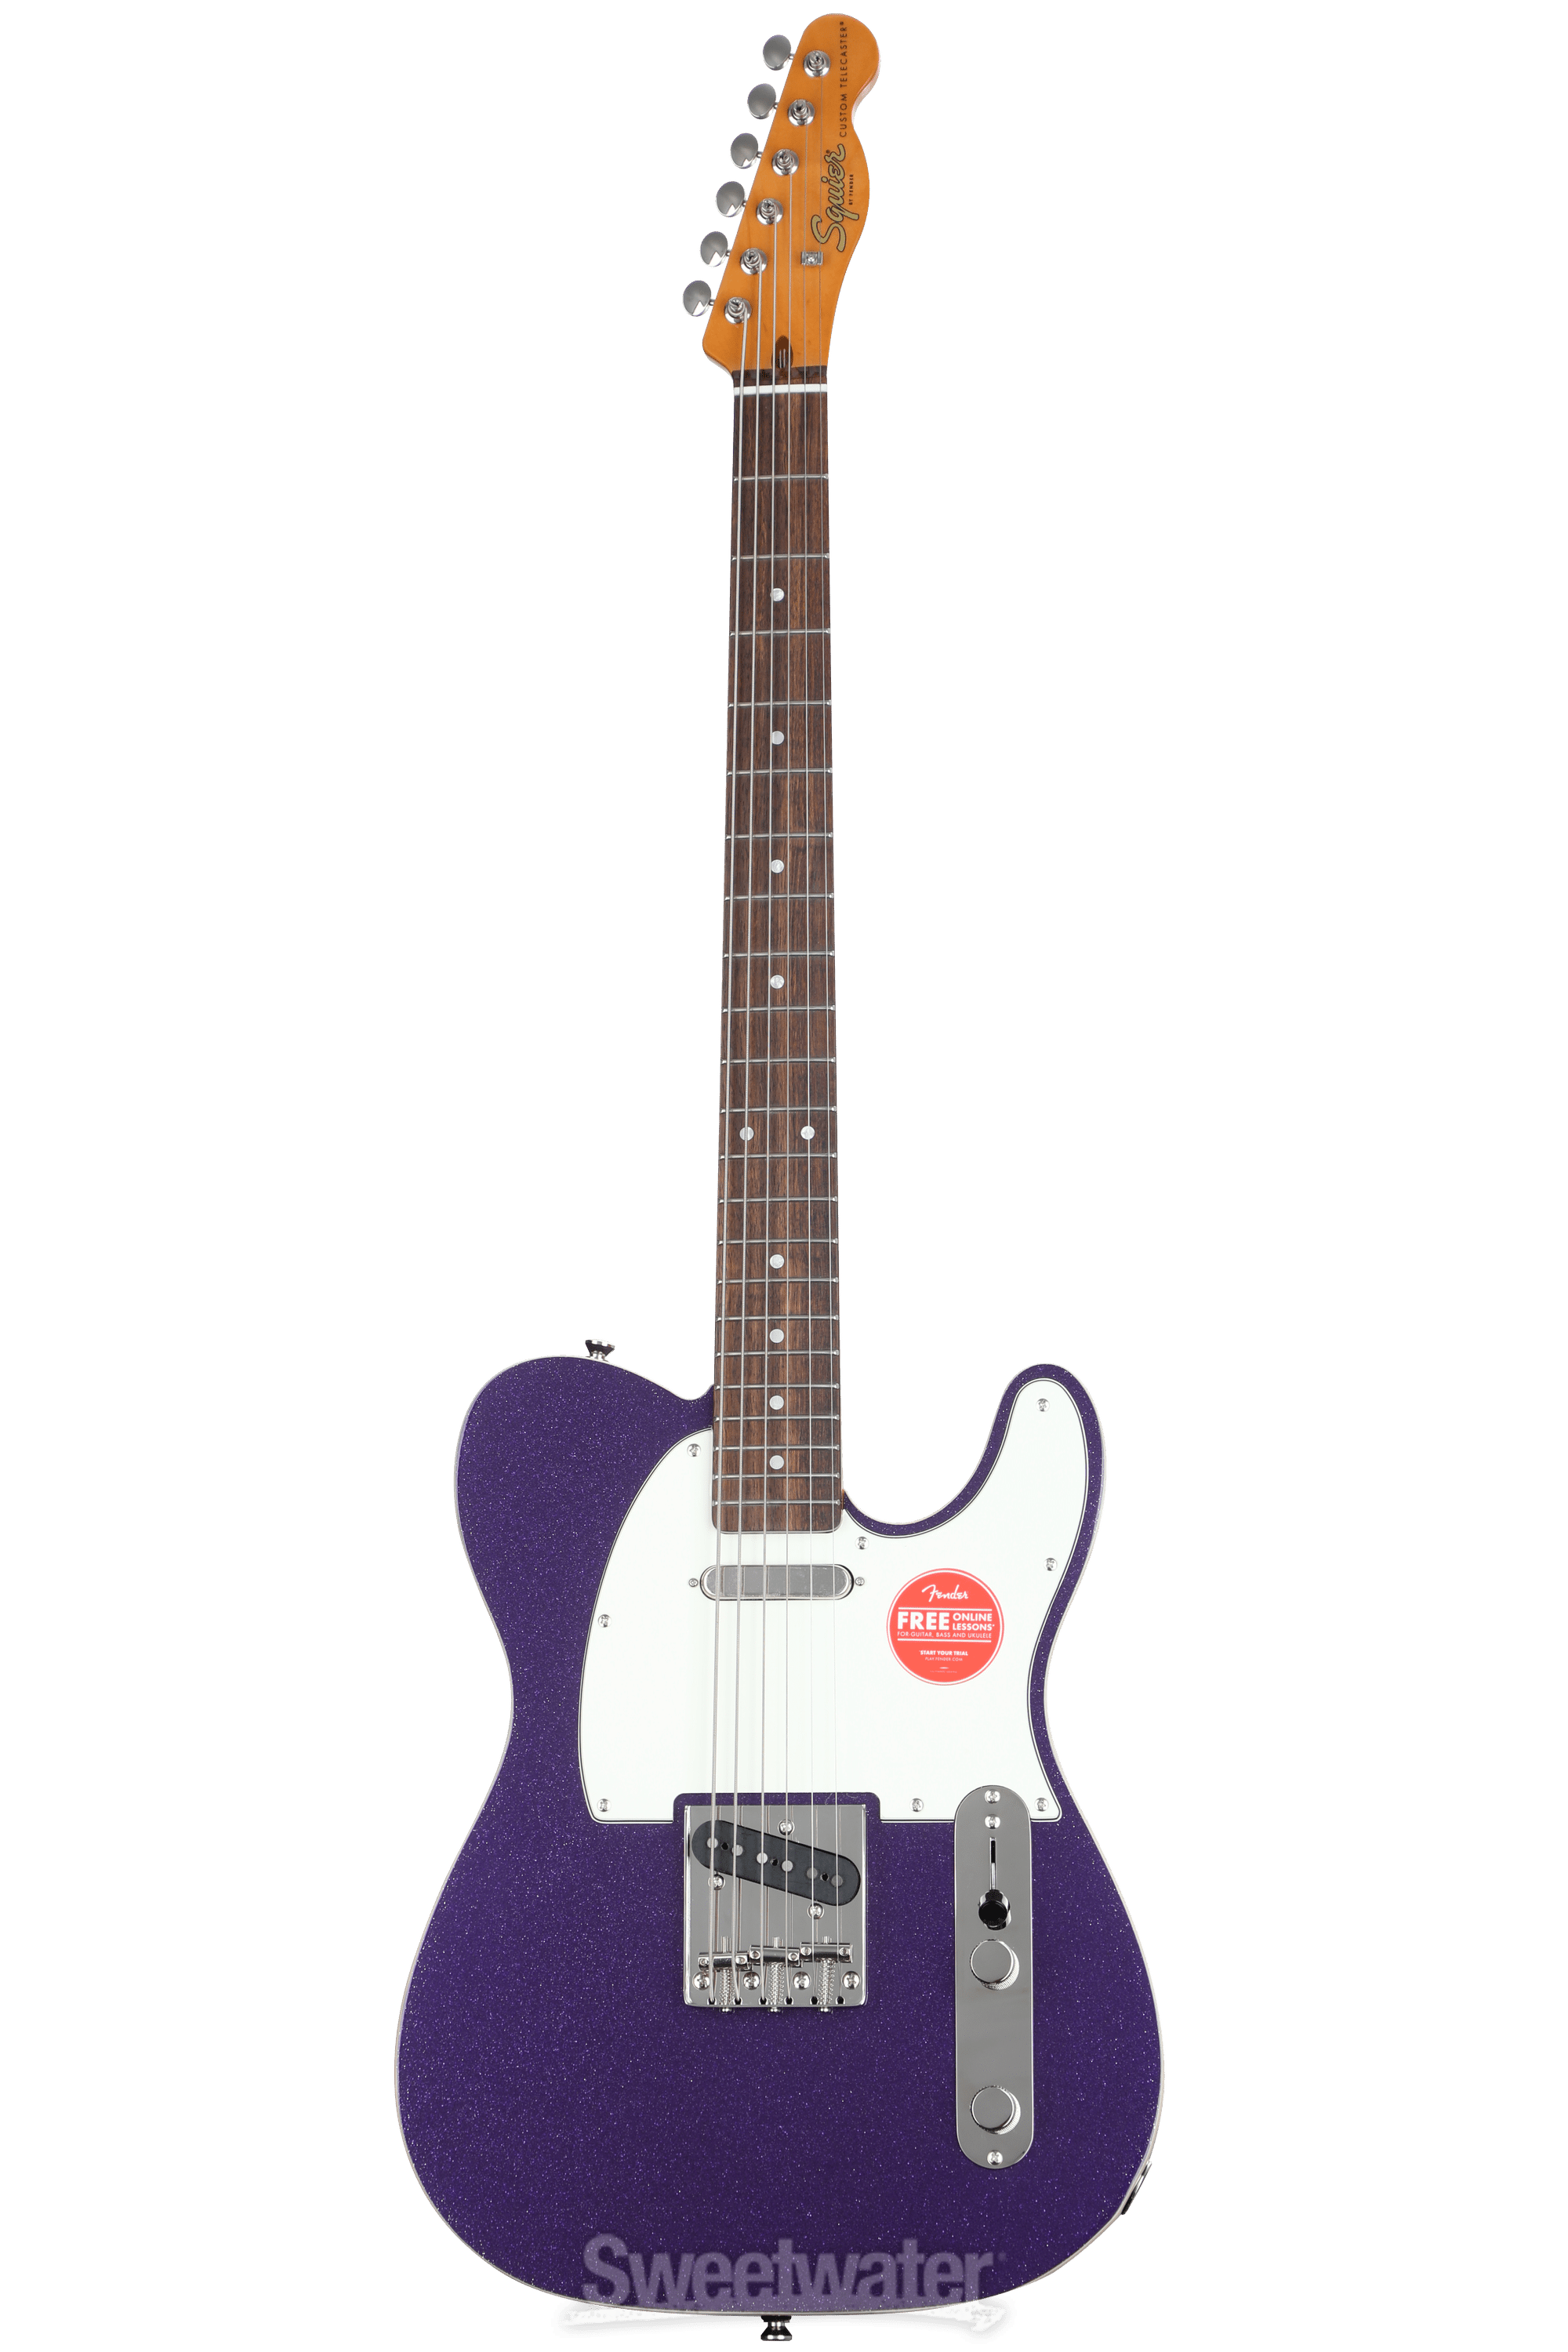 Squier Classic Vibe Baritone Custom Telecaster Guitar - Purple Sparkle,  Sweetwater Exclusive